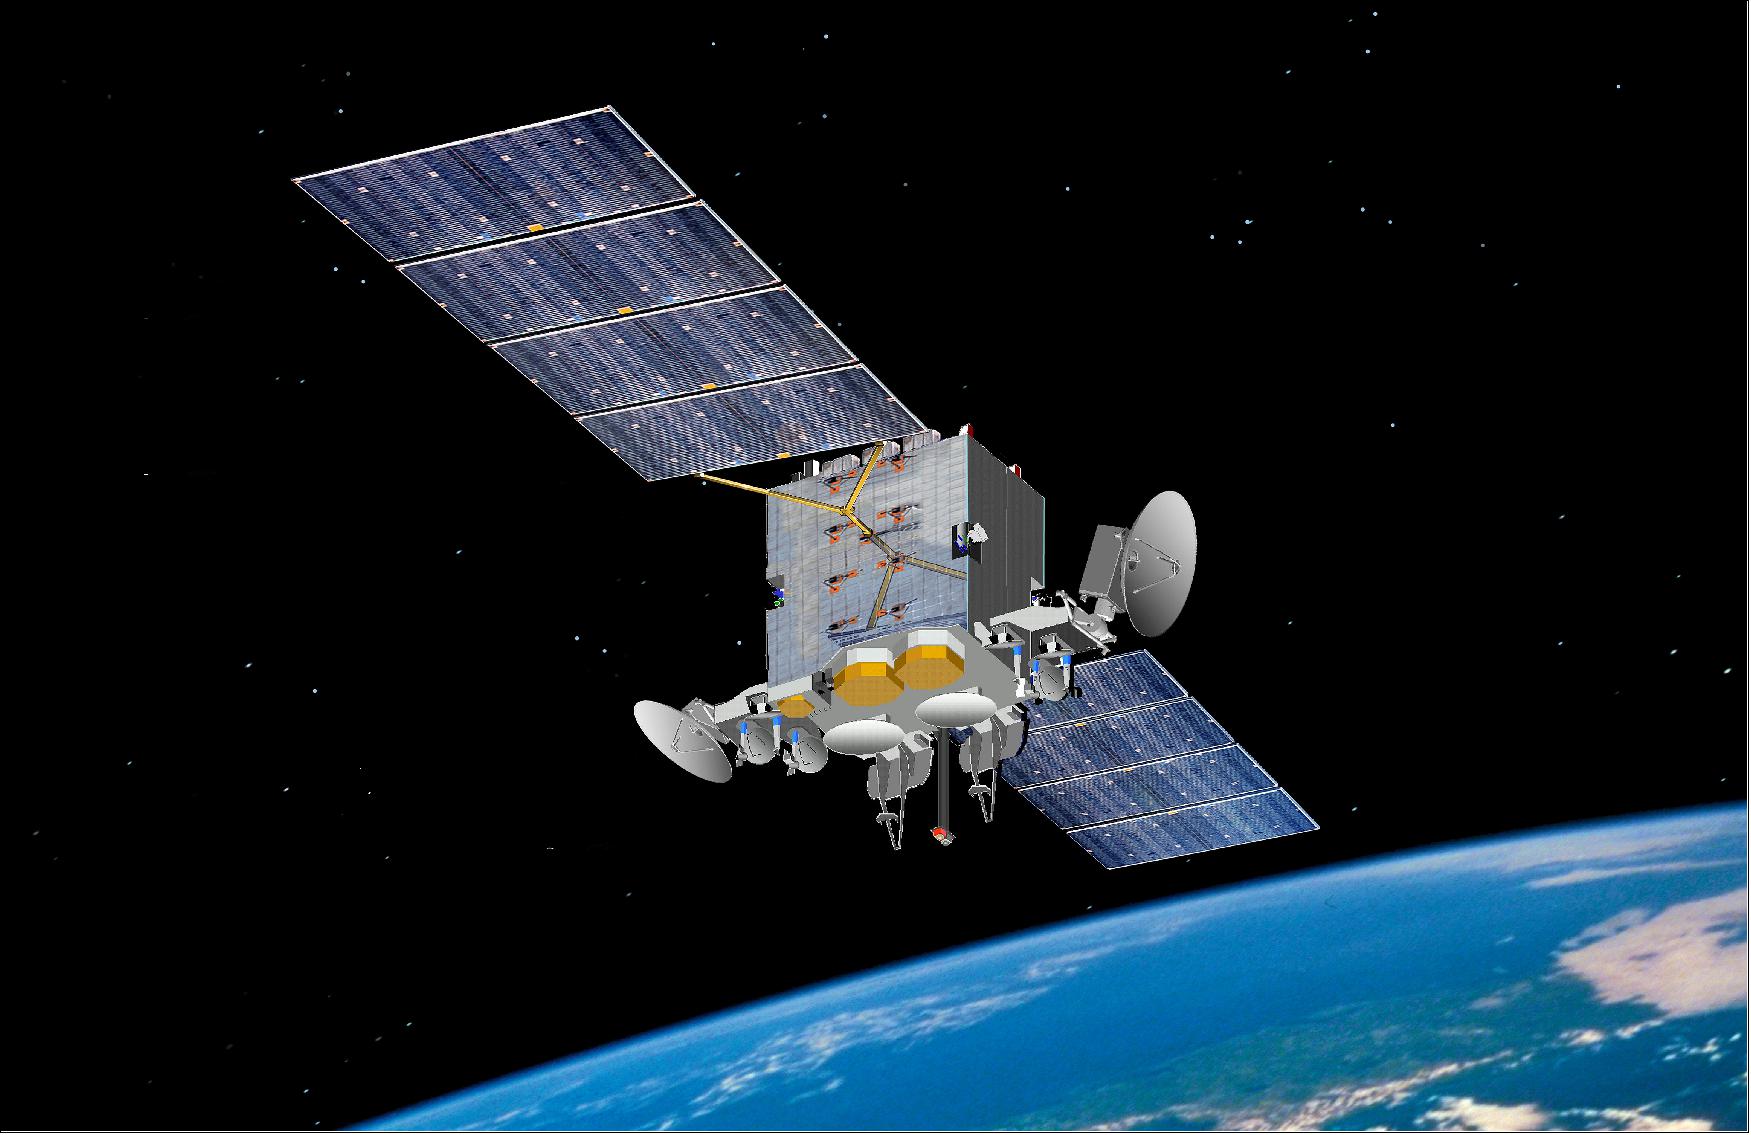 Figure 30: Artist's rendition of the AEHF-1 (Advanced Extremely High Frequency) communication satellite of DoD, launched on Aug. 14, 2010 (image credit: Space and Missile Systems Center)